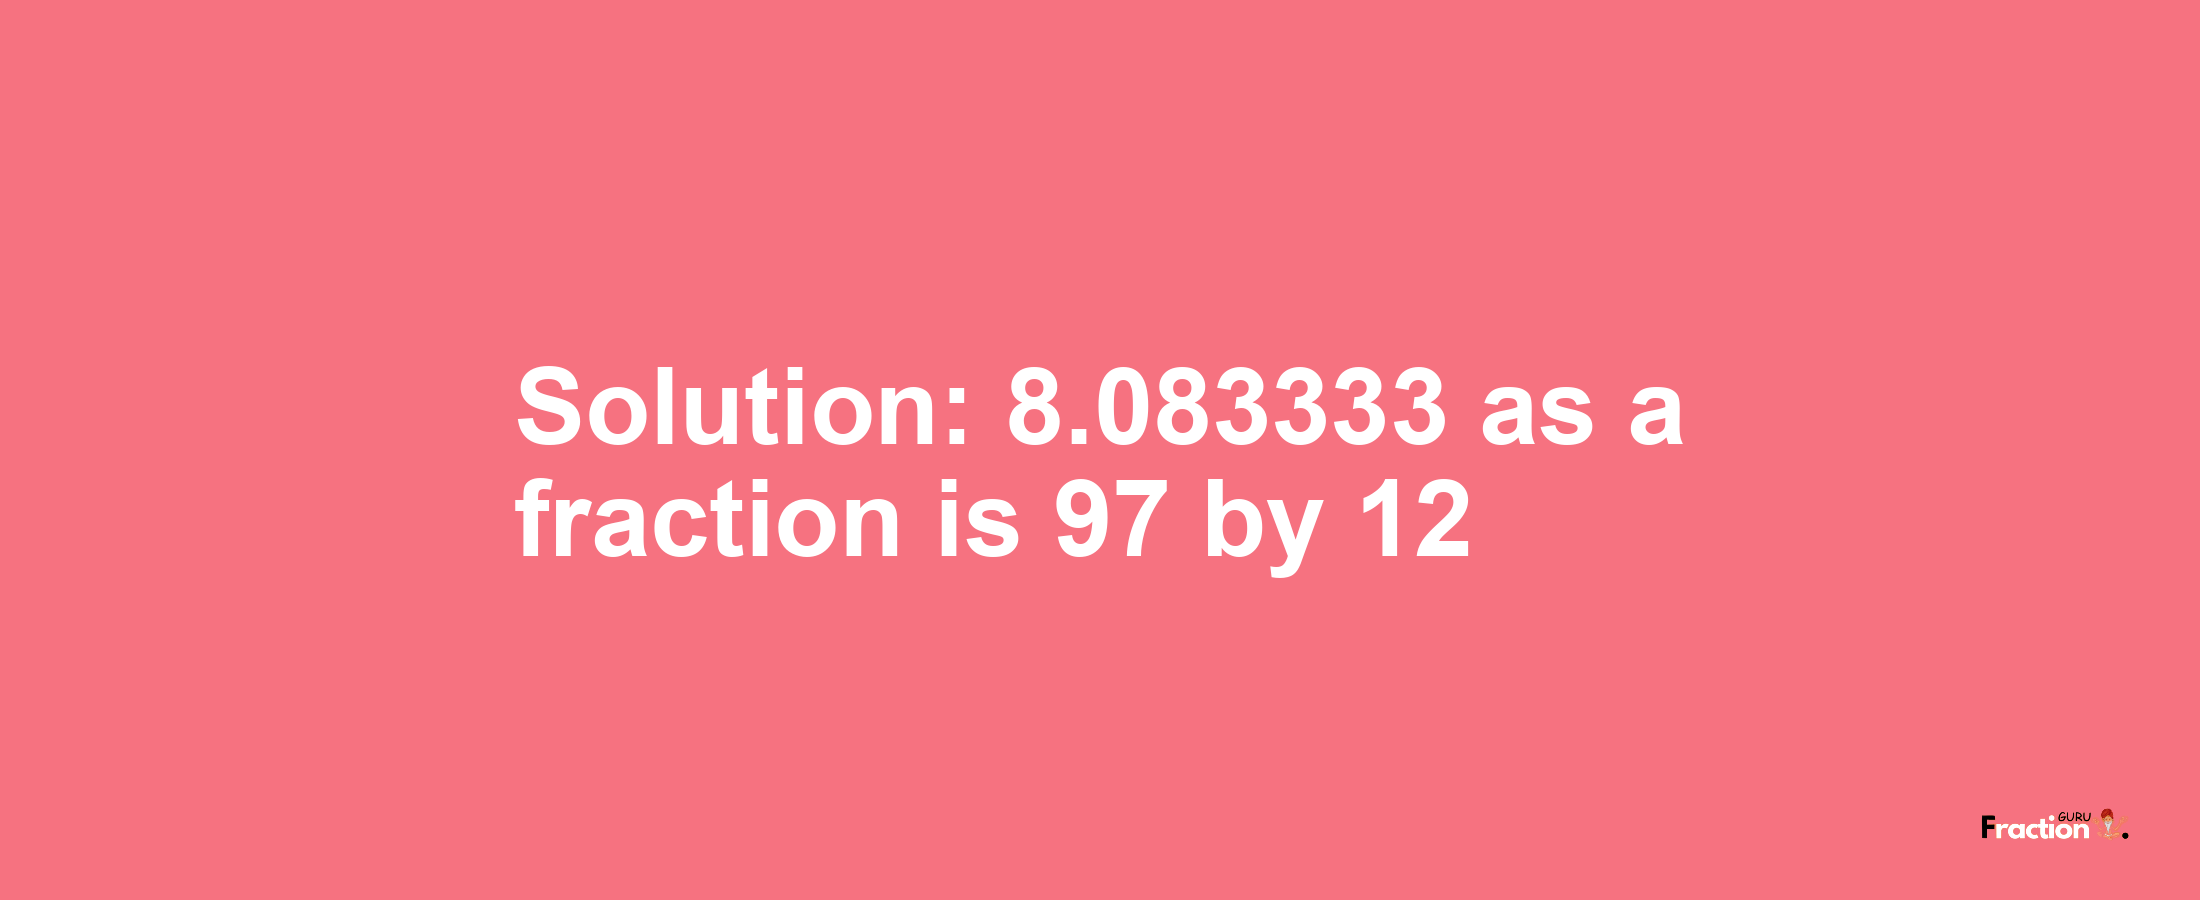 Solution:8.083333 as a fraction is 97/12